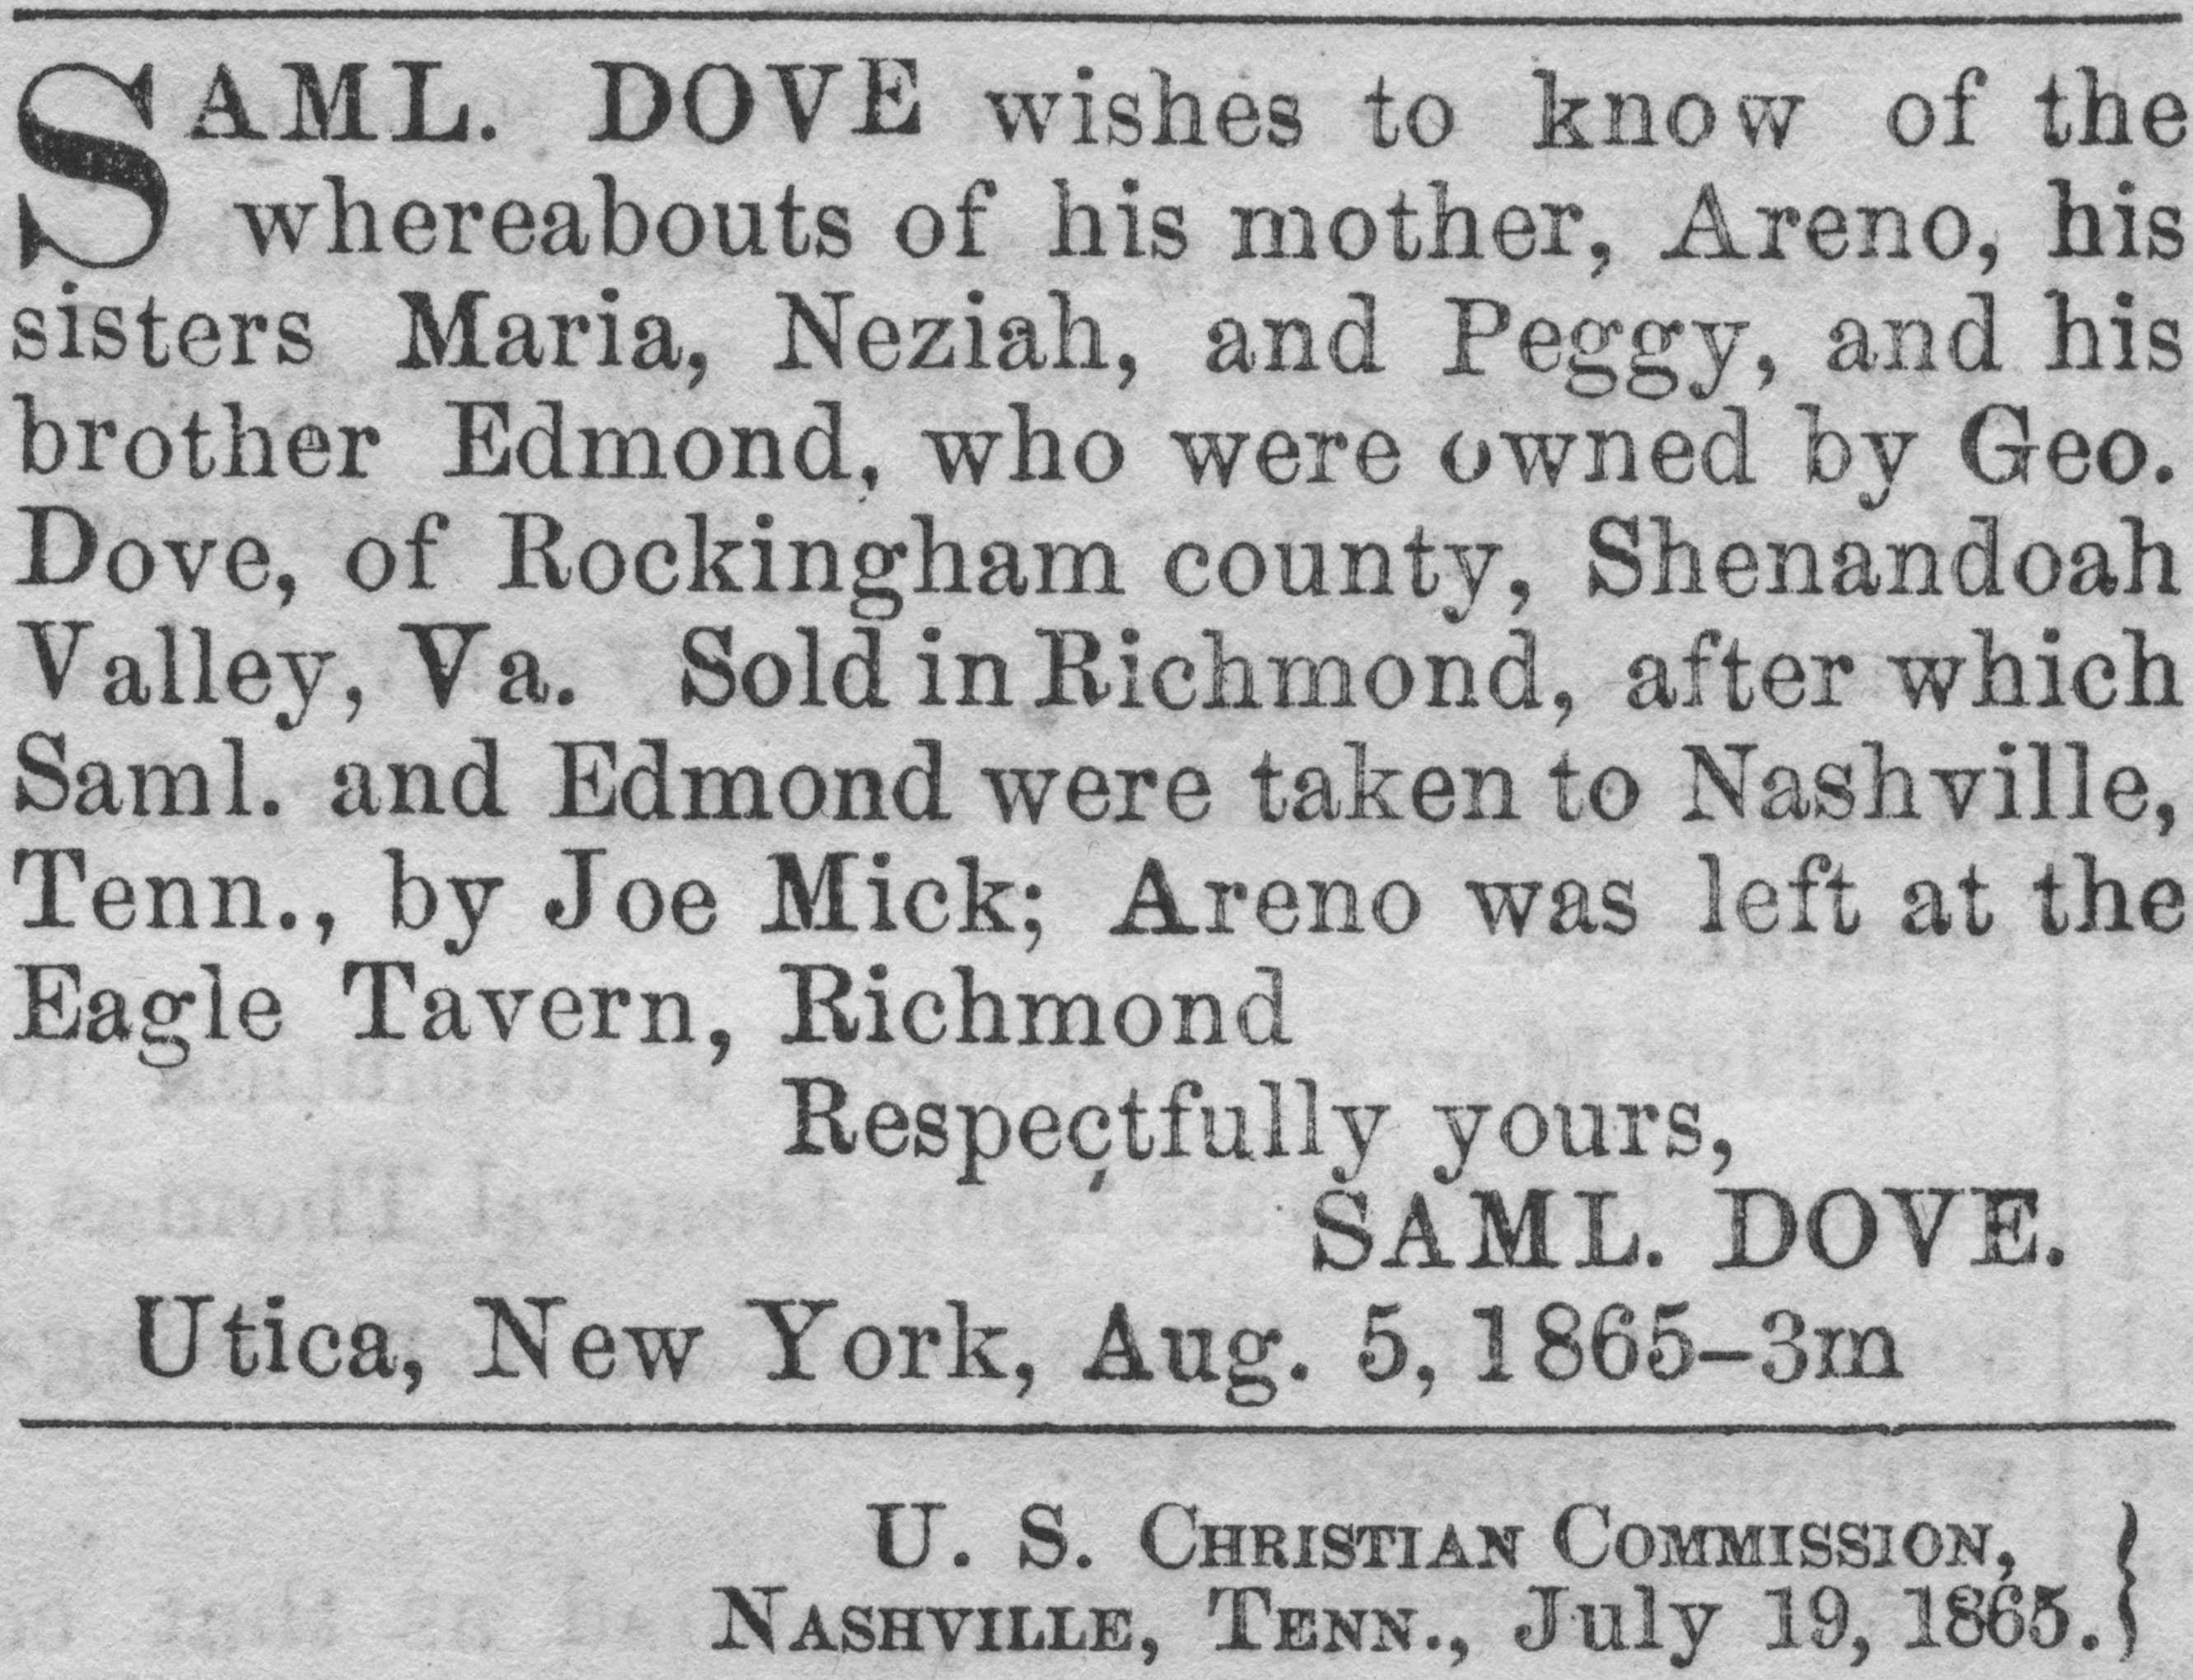 A single newspaper classified by Samuel Dove trying to find his mother and sisters. It is dated August 5, 1865.